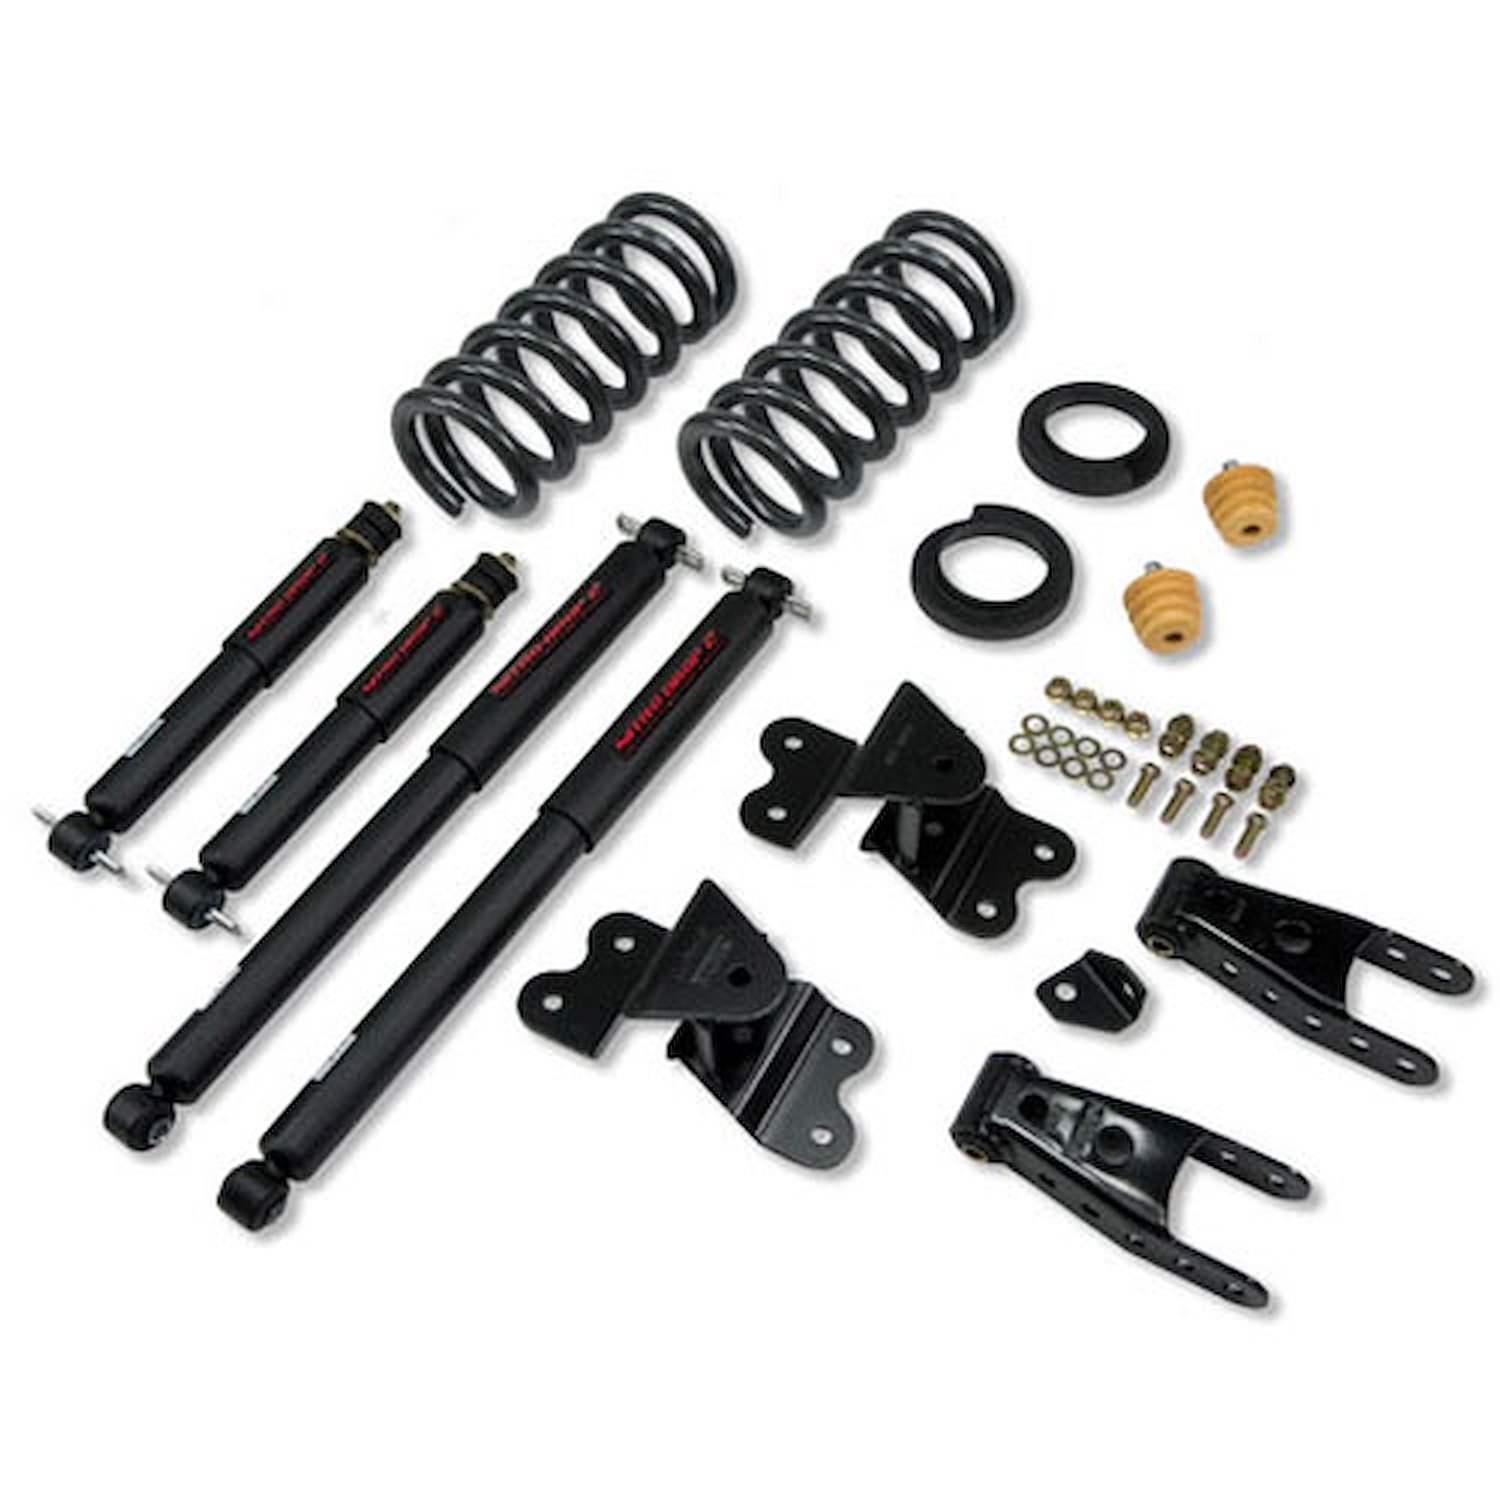 686ND Complete Lowering Kit for 1988-1998 Chevy Silverado/GMC Sierra 1500 Standard Cab